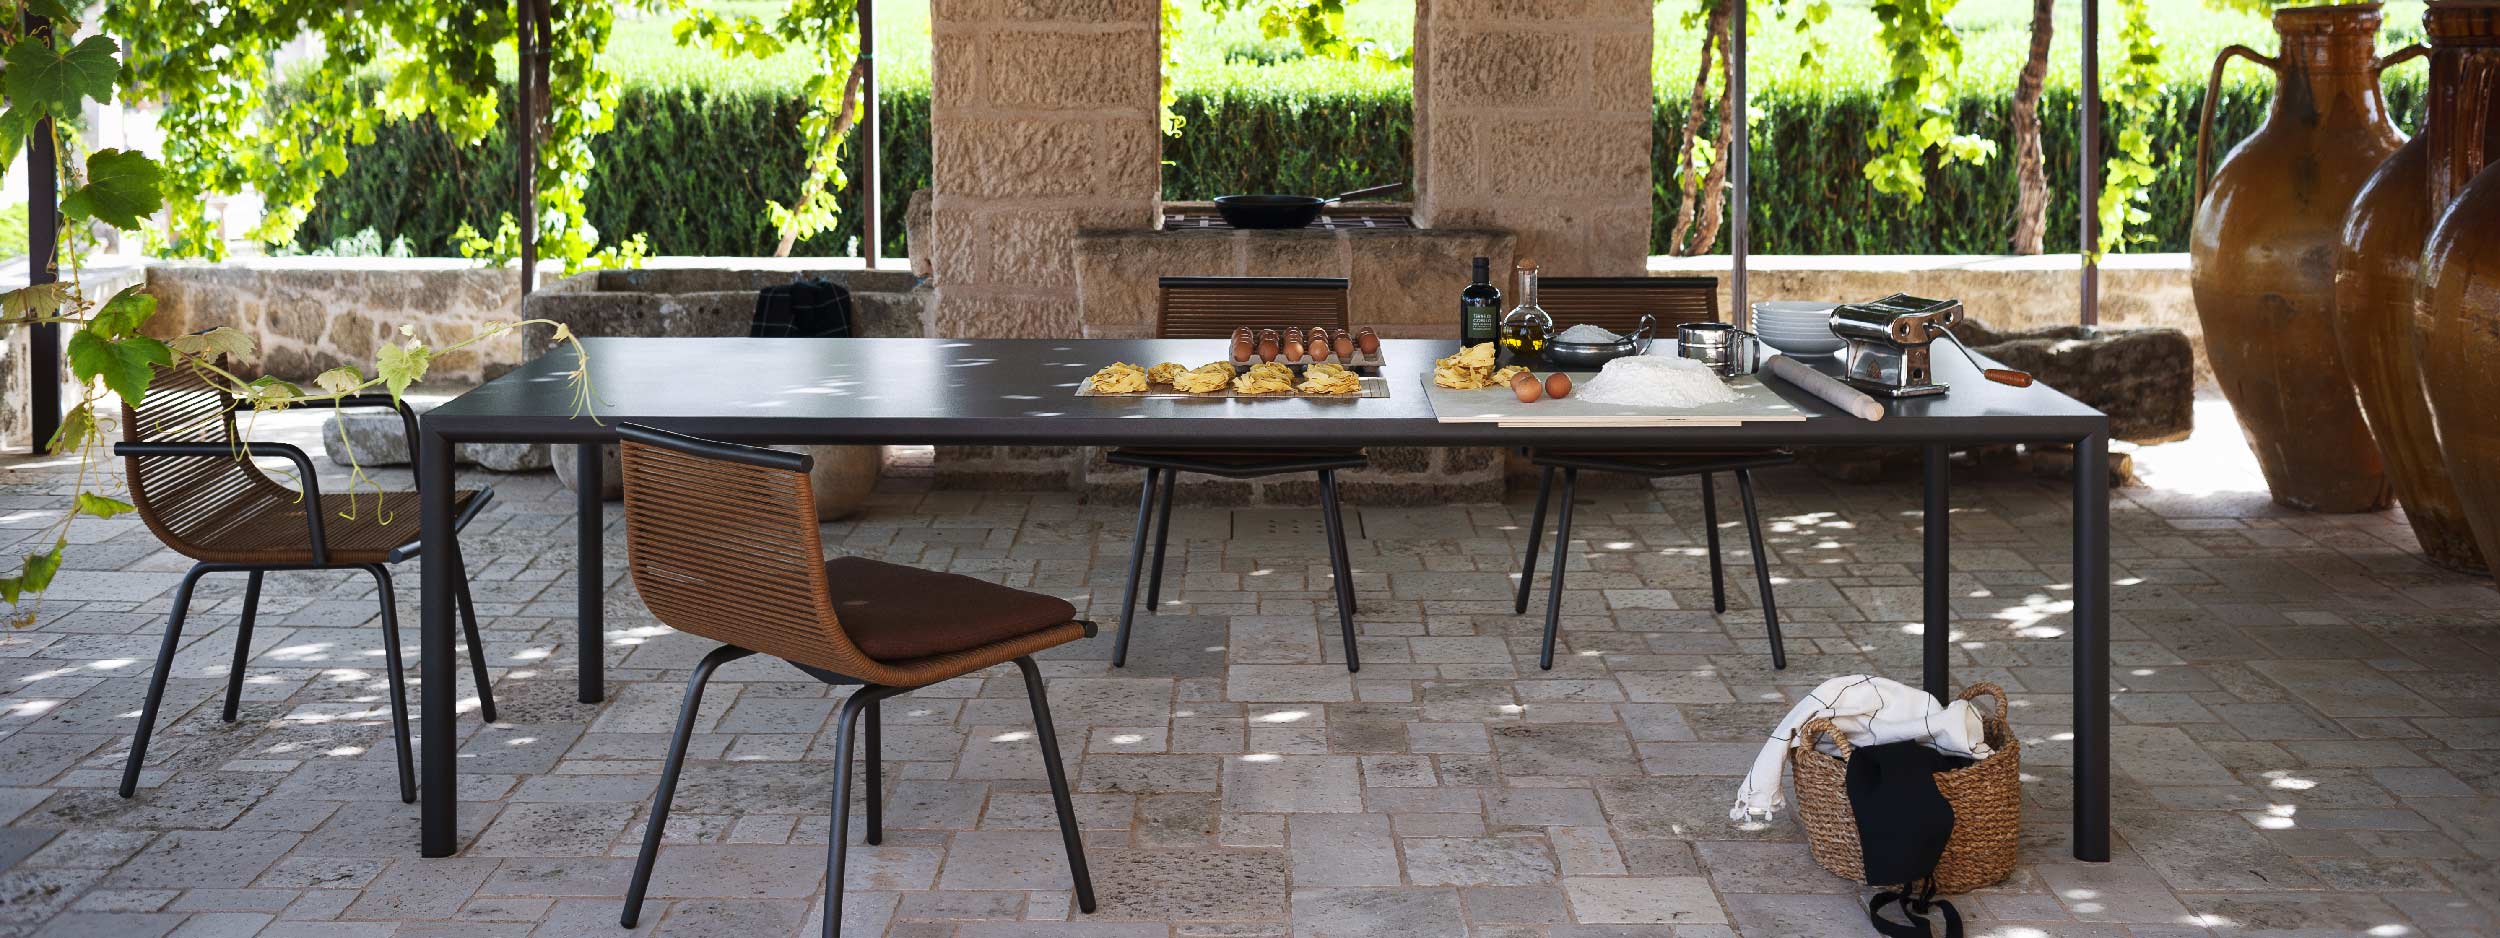 Image of Laze garden dining chairs, shown with or without arms, placed around Plein Air minimalist garden dining table